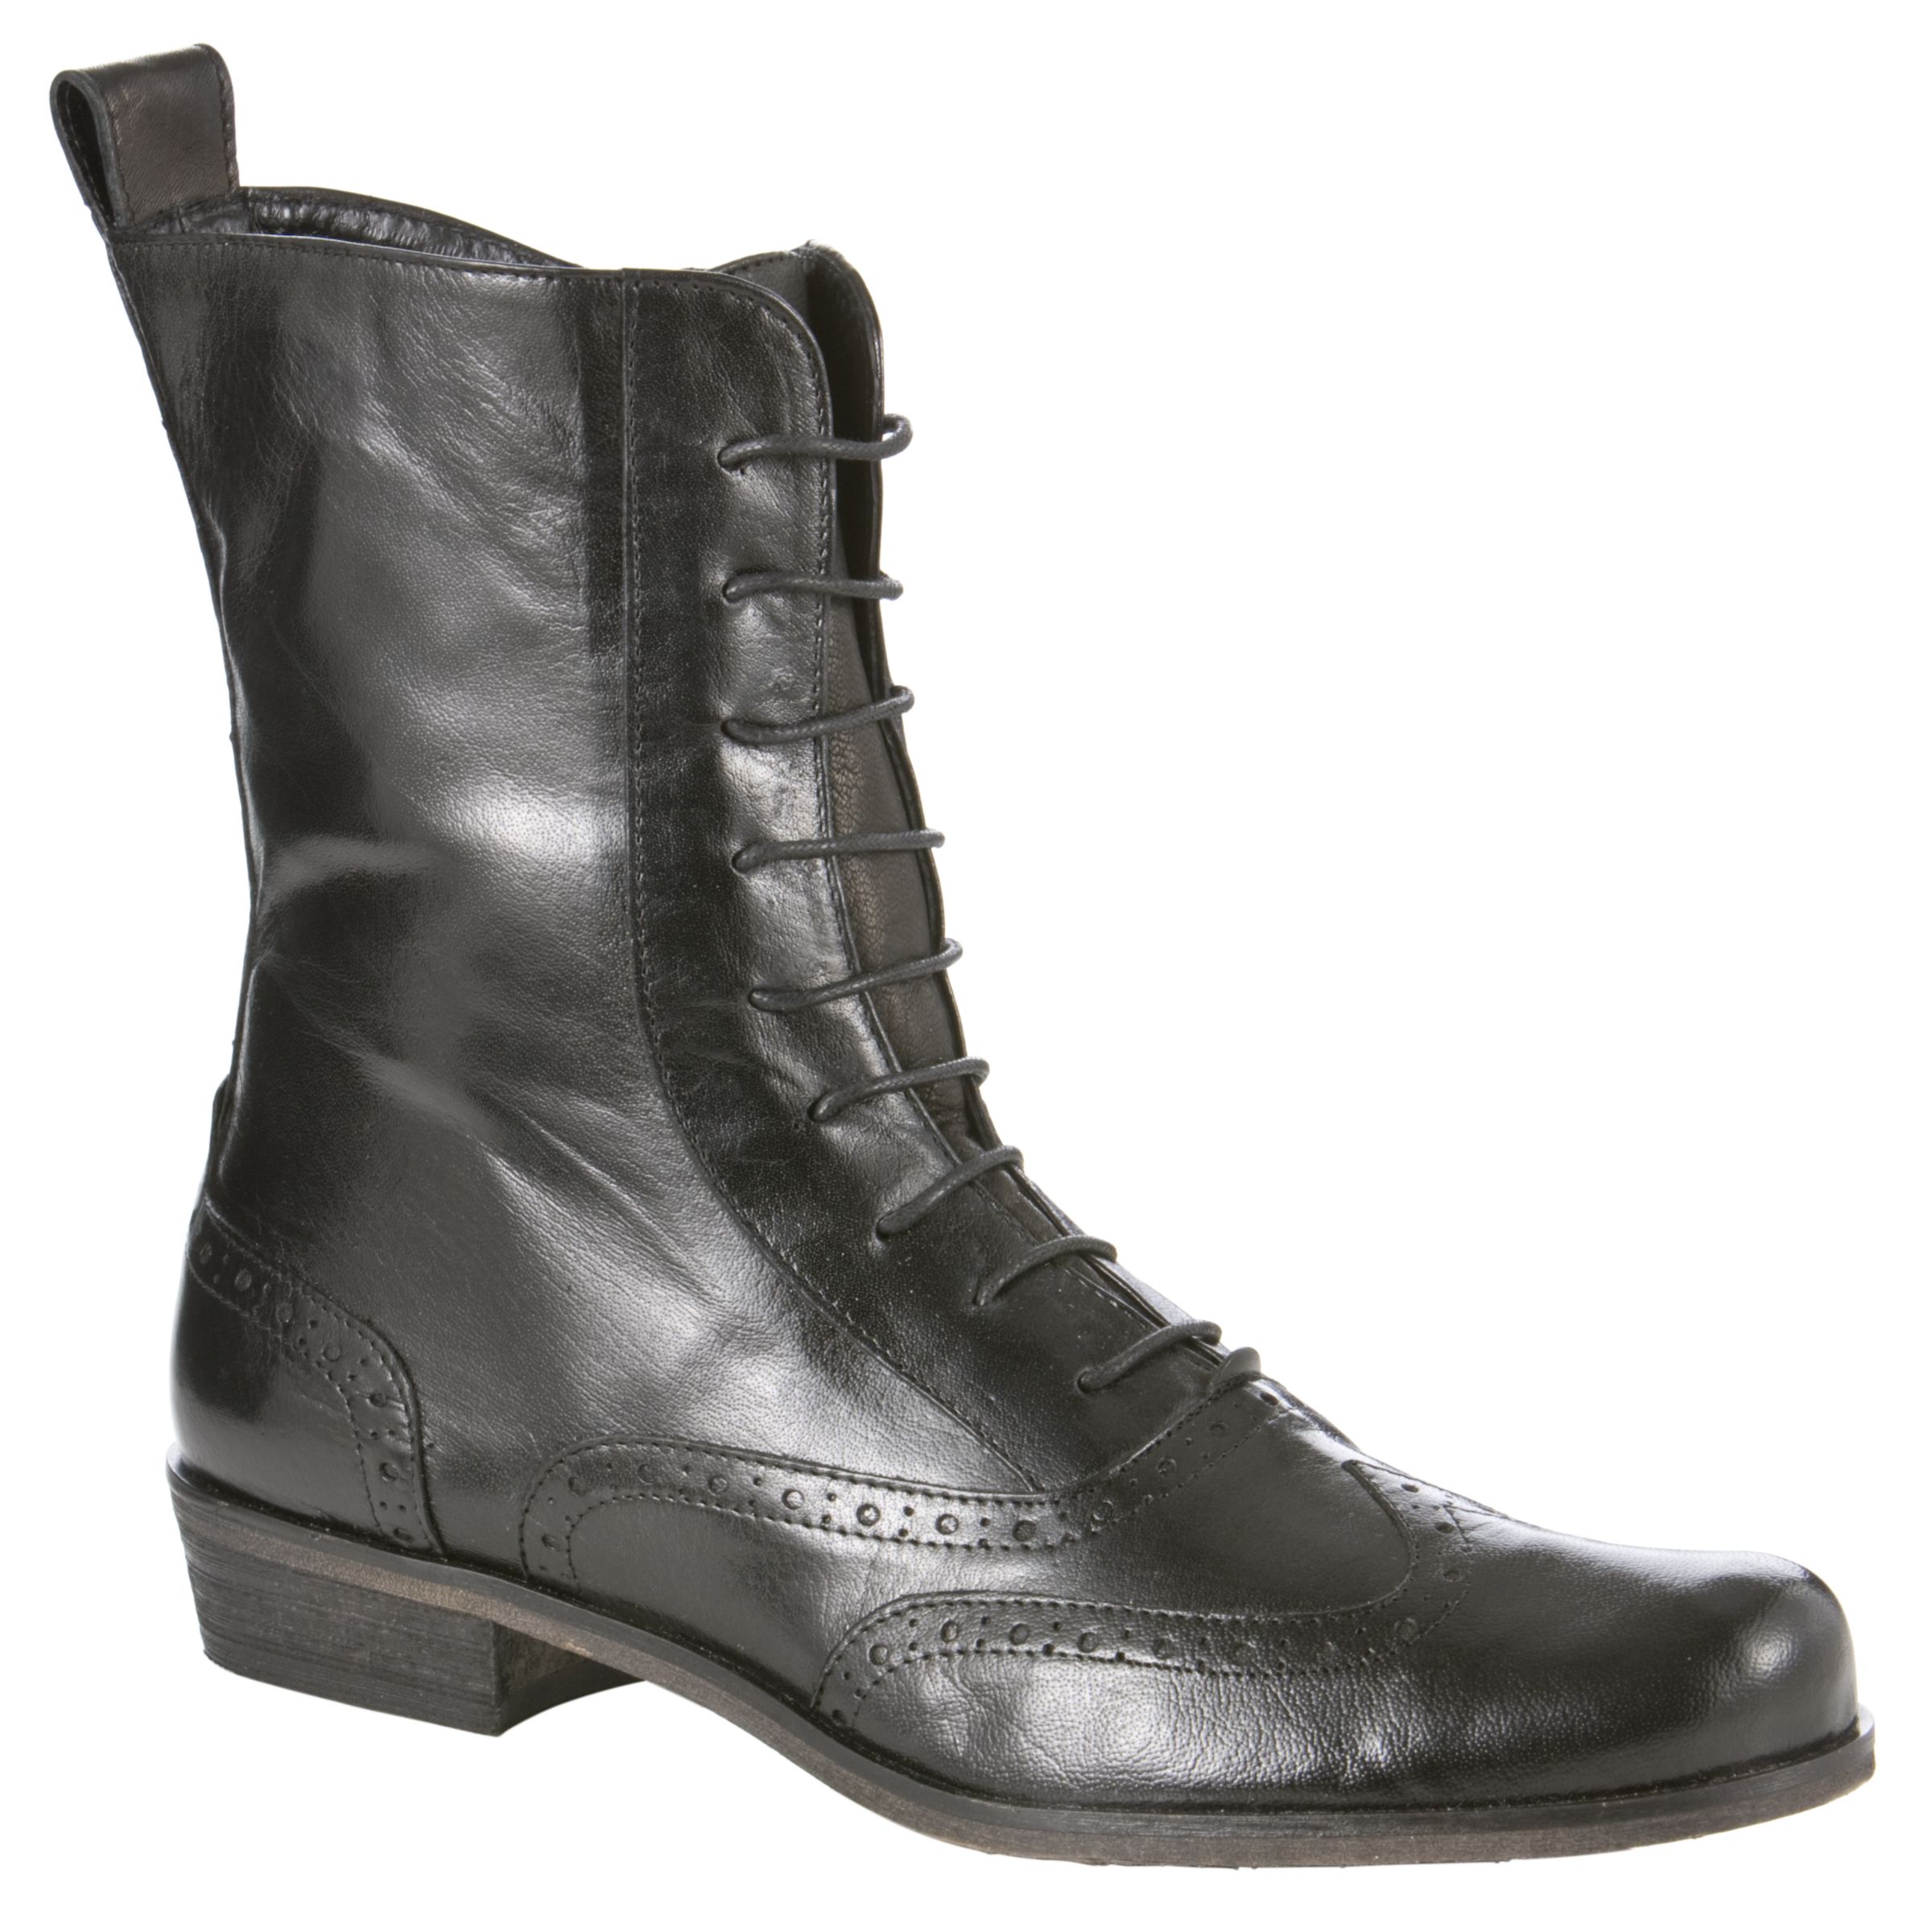 Pied A Terre Oneill Calf Boots, Black at John Lewis